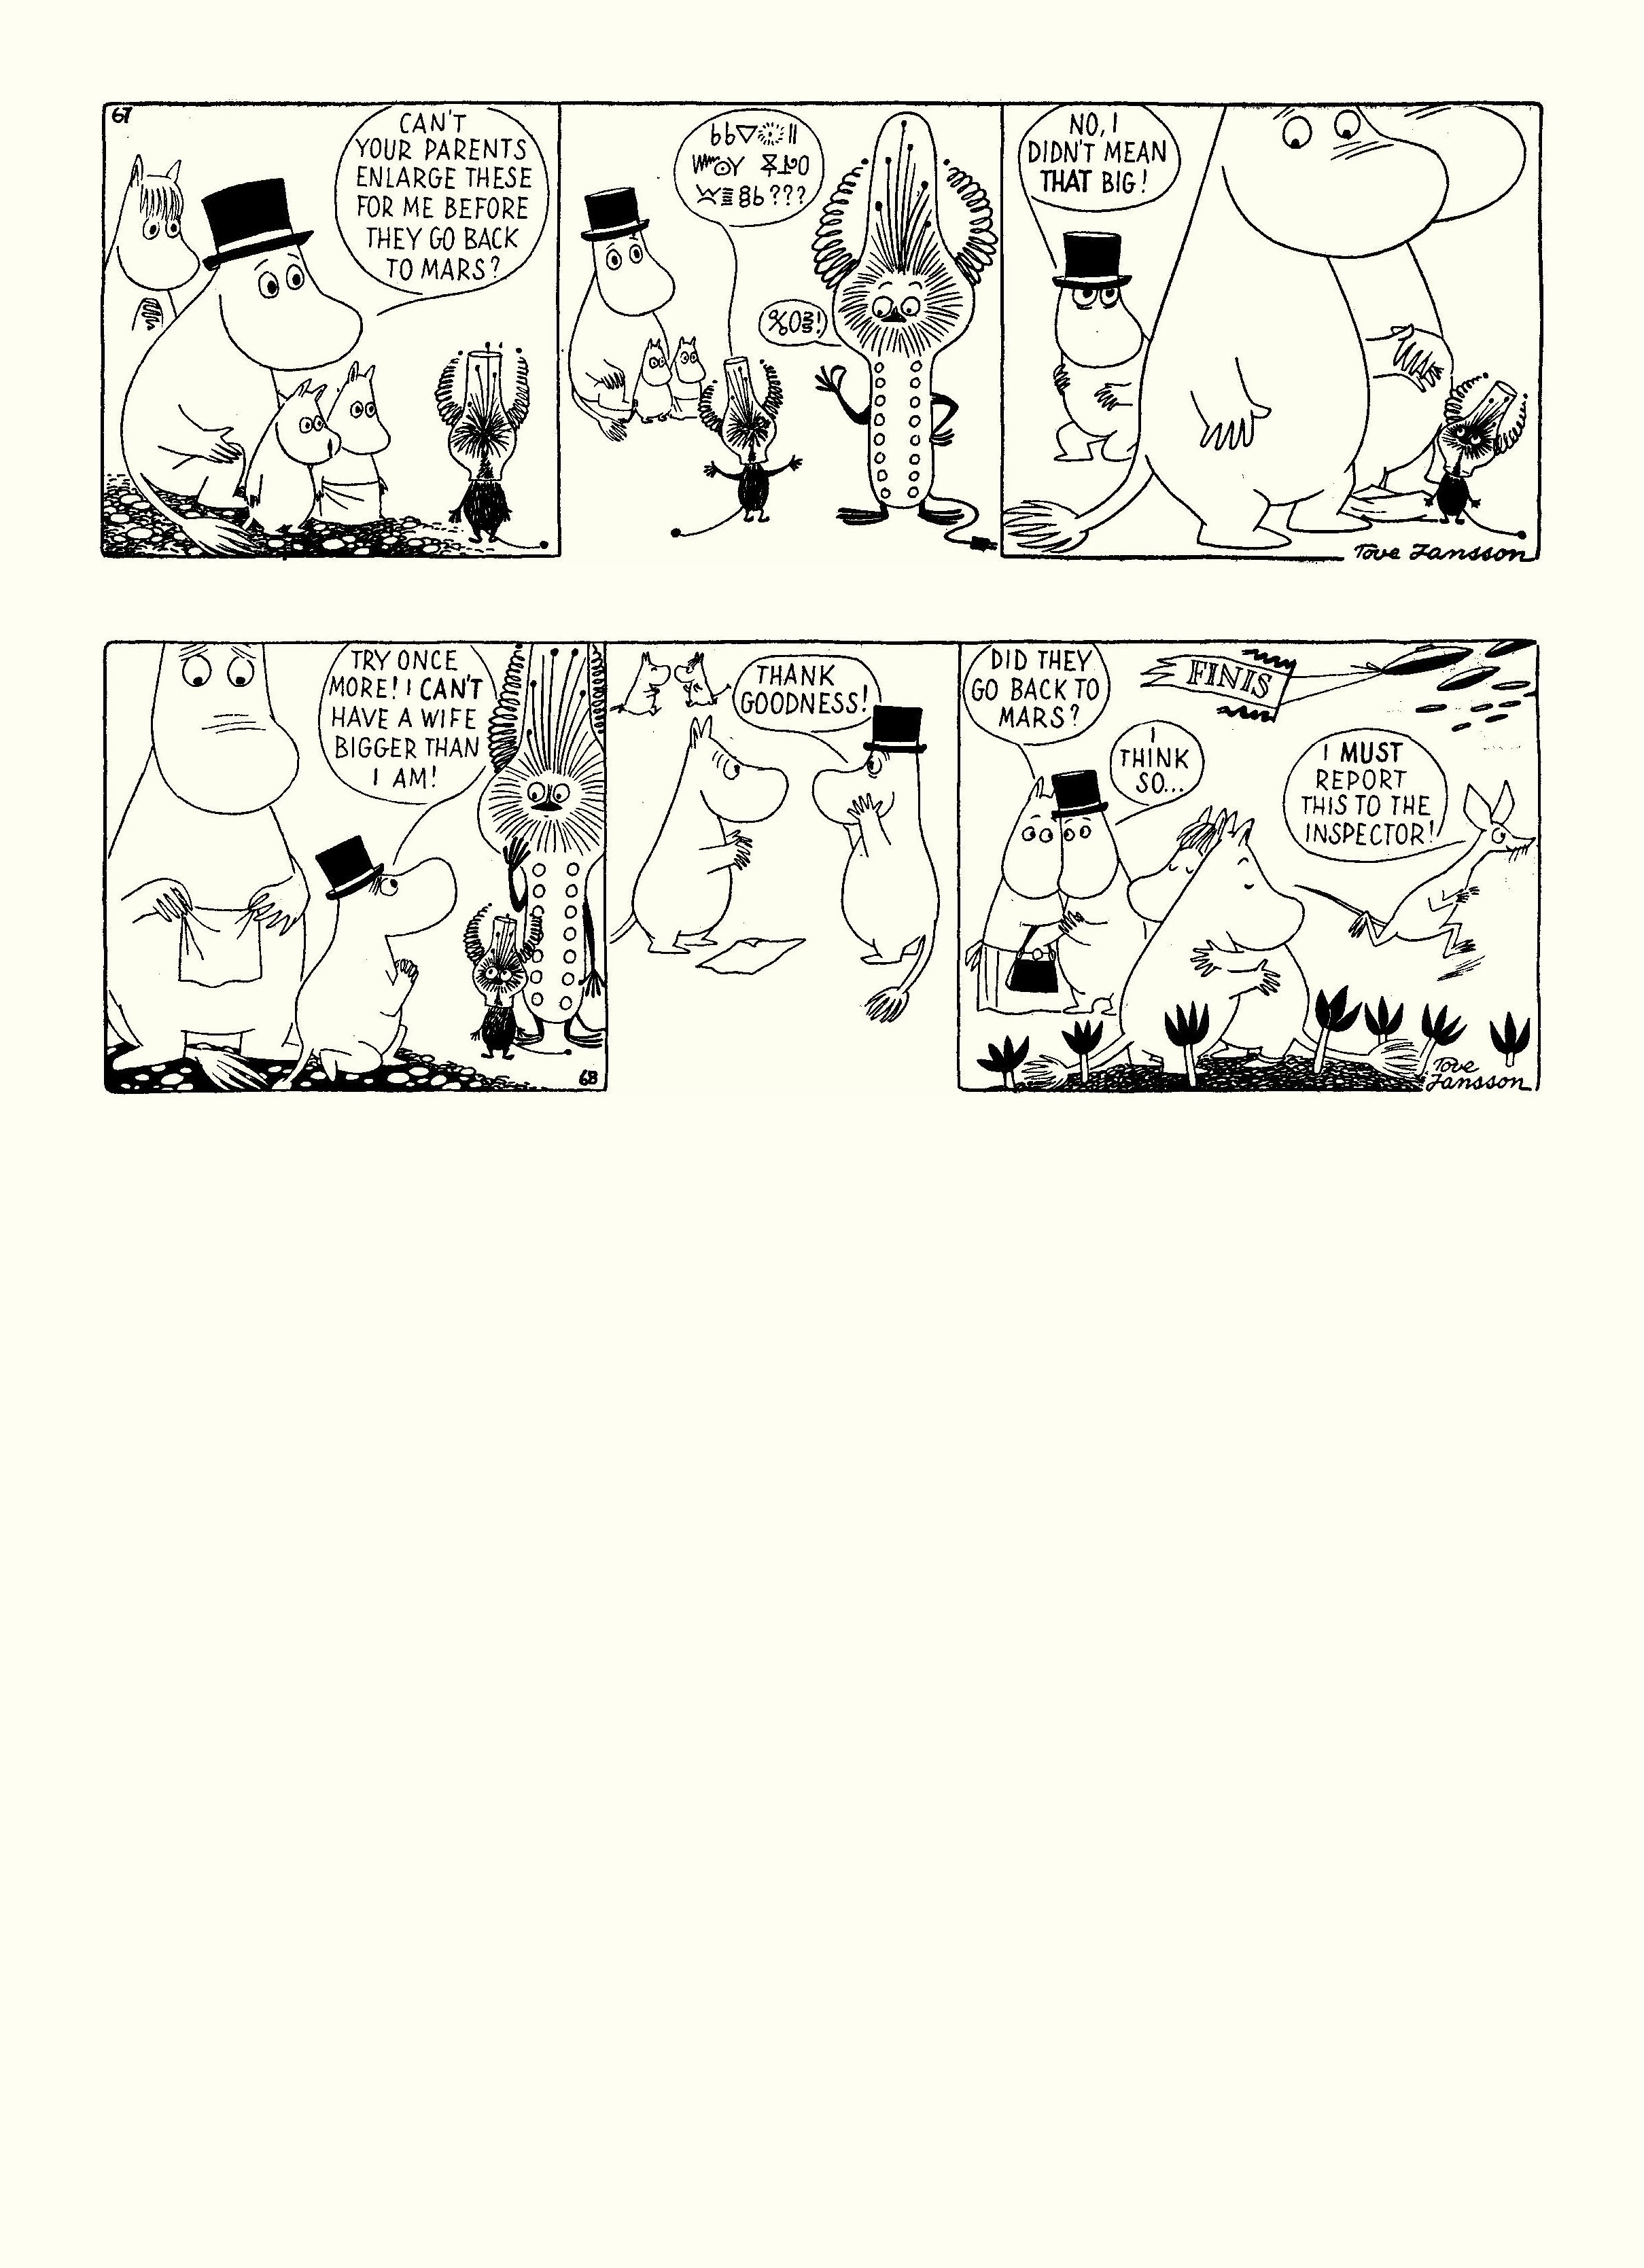 Read online Moomin: The Complete Tove Jansson Comic Strip comic -  Issue # TPB 3 - 54